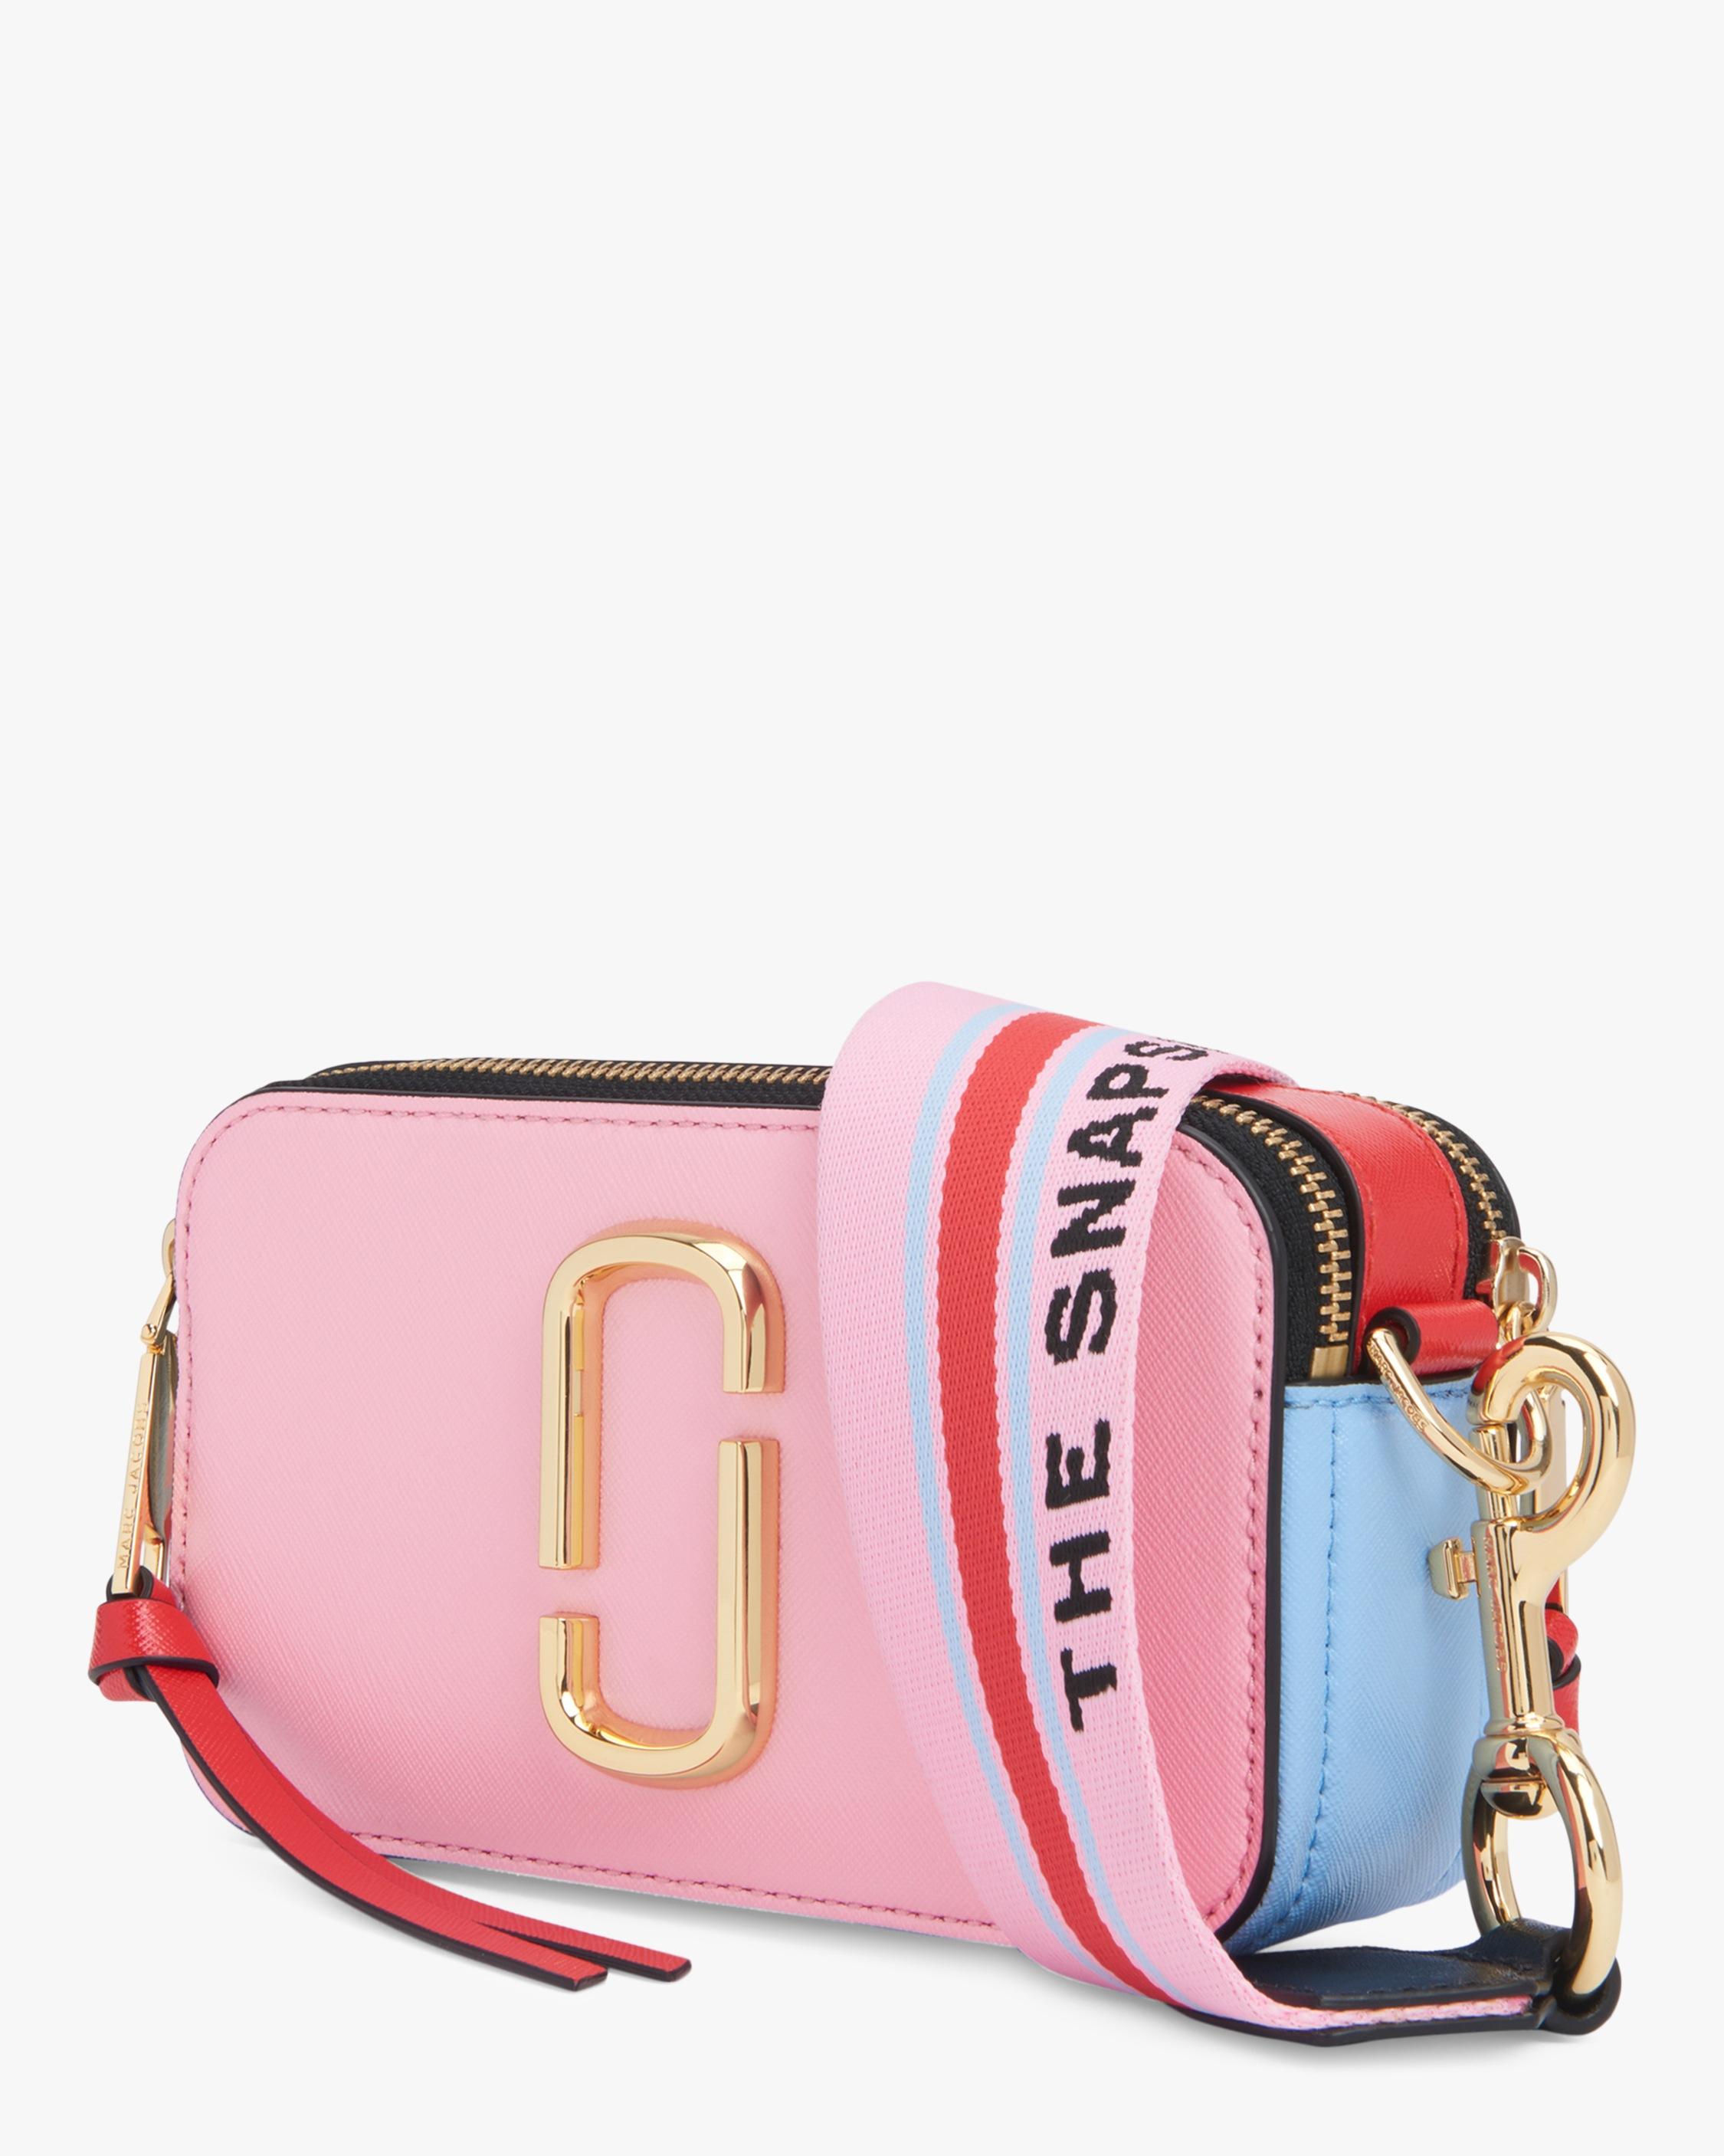 Marc Jacobs The Snapshot Camera Bag in Pink - Lyst